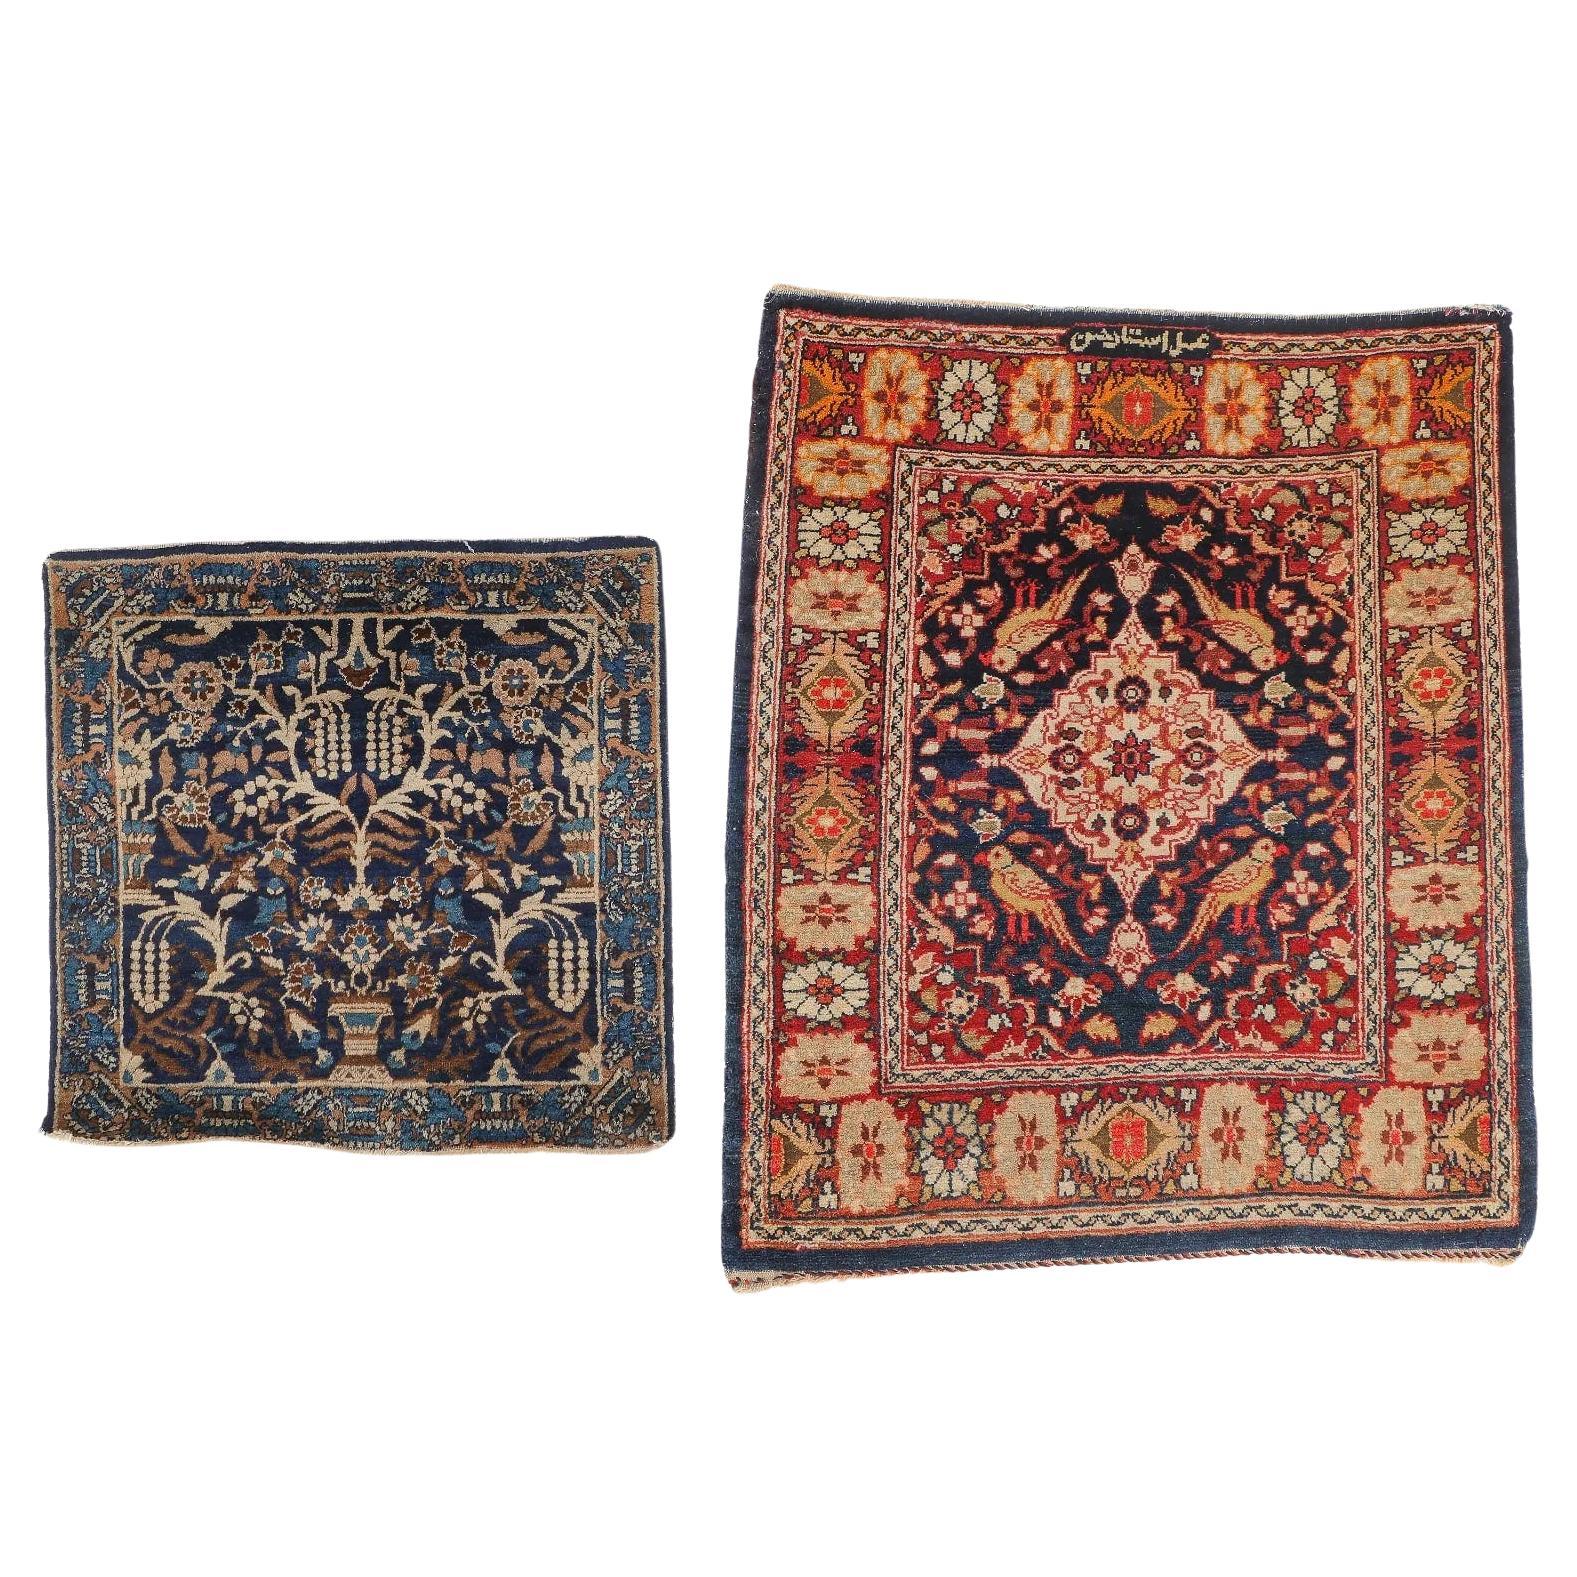 Lot of 2 Antique Persian Sarouk and Yazd Rugs 2' x 2.5', 1900s - 2B32 For Sale